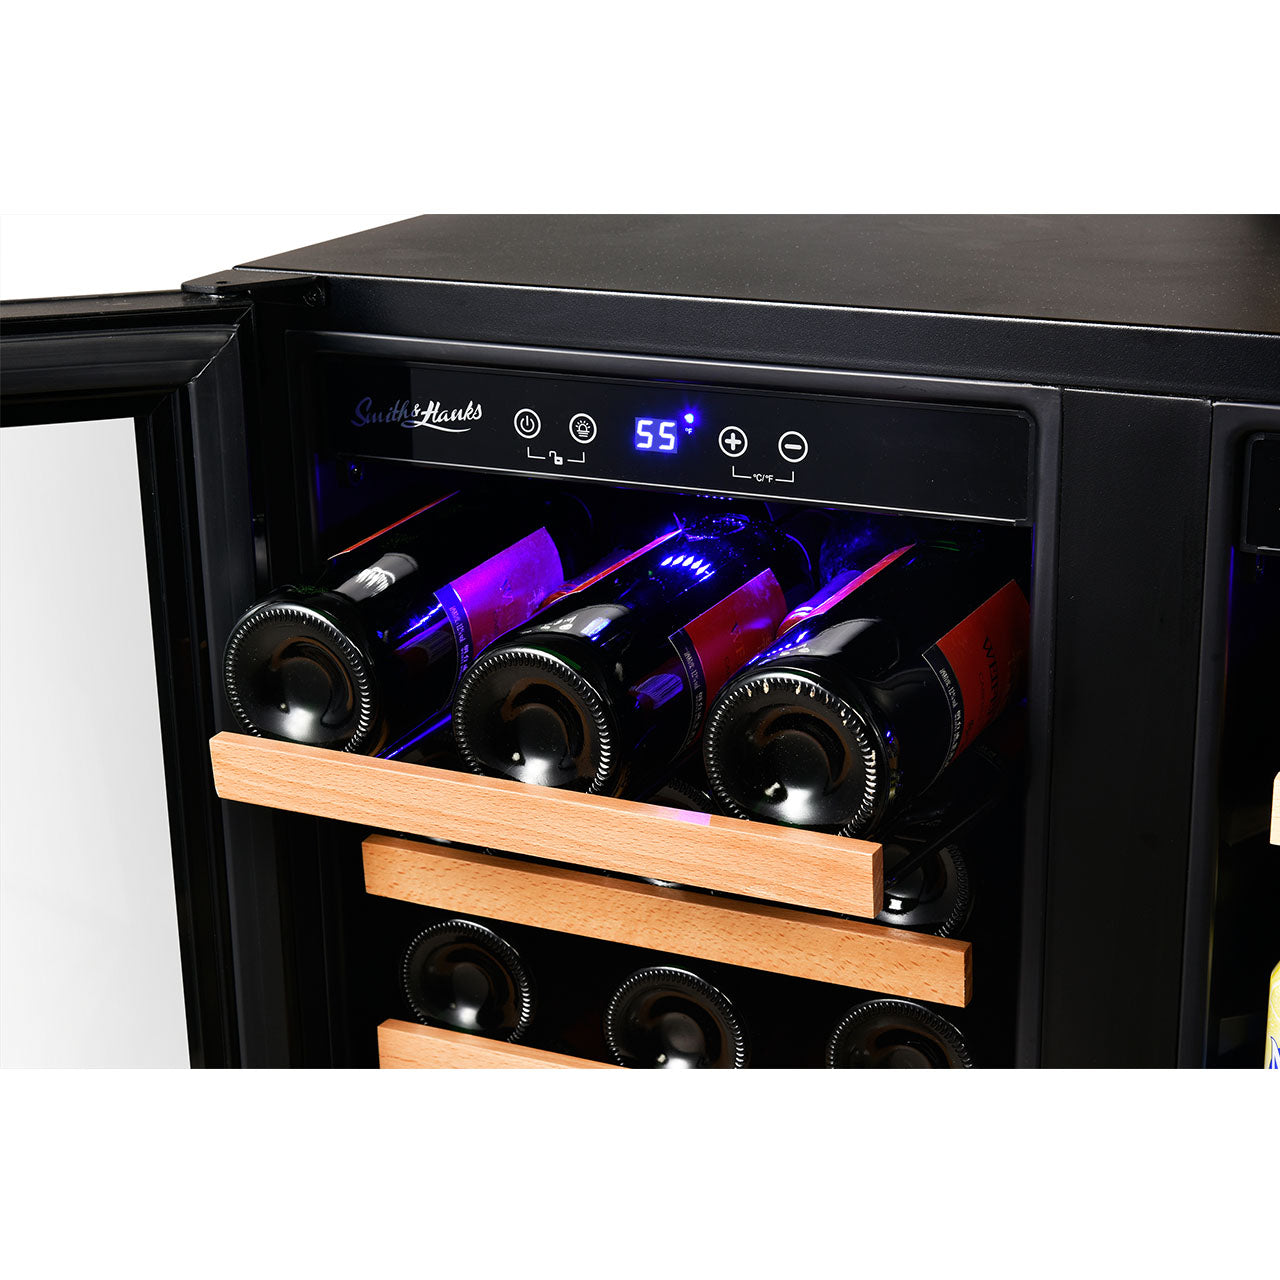 Smith & Hanks 30" Wide Dual Zone Wine and Beverage Center Combo | Holds 34 Bottles & 90 Cans | BEV176D